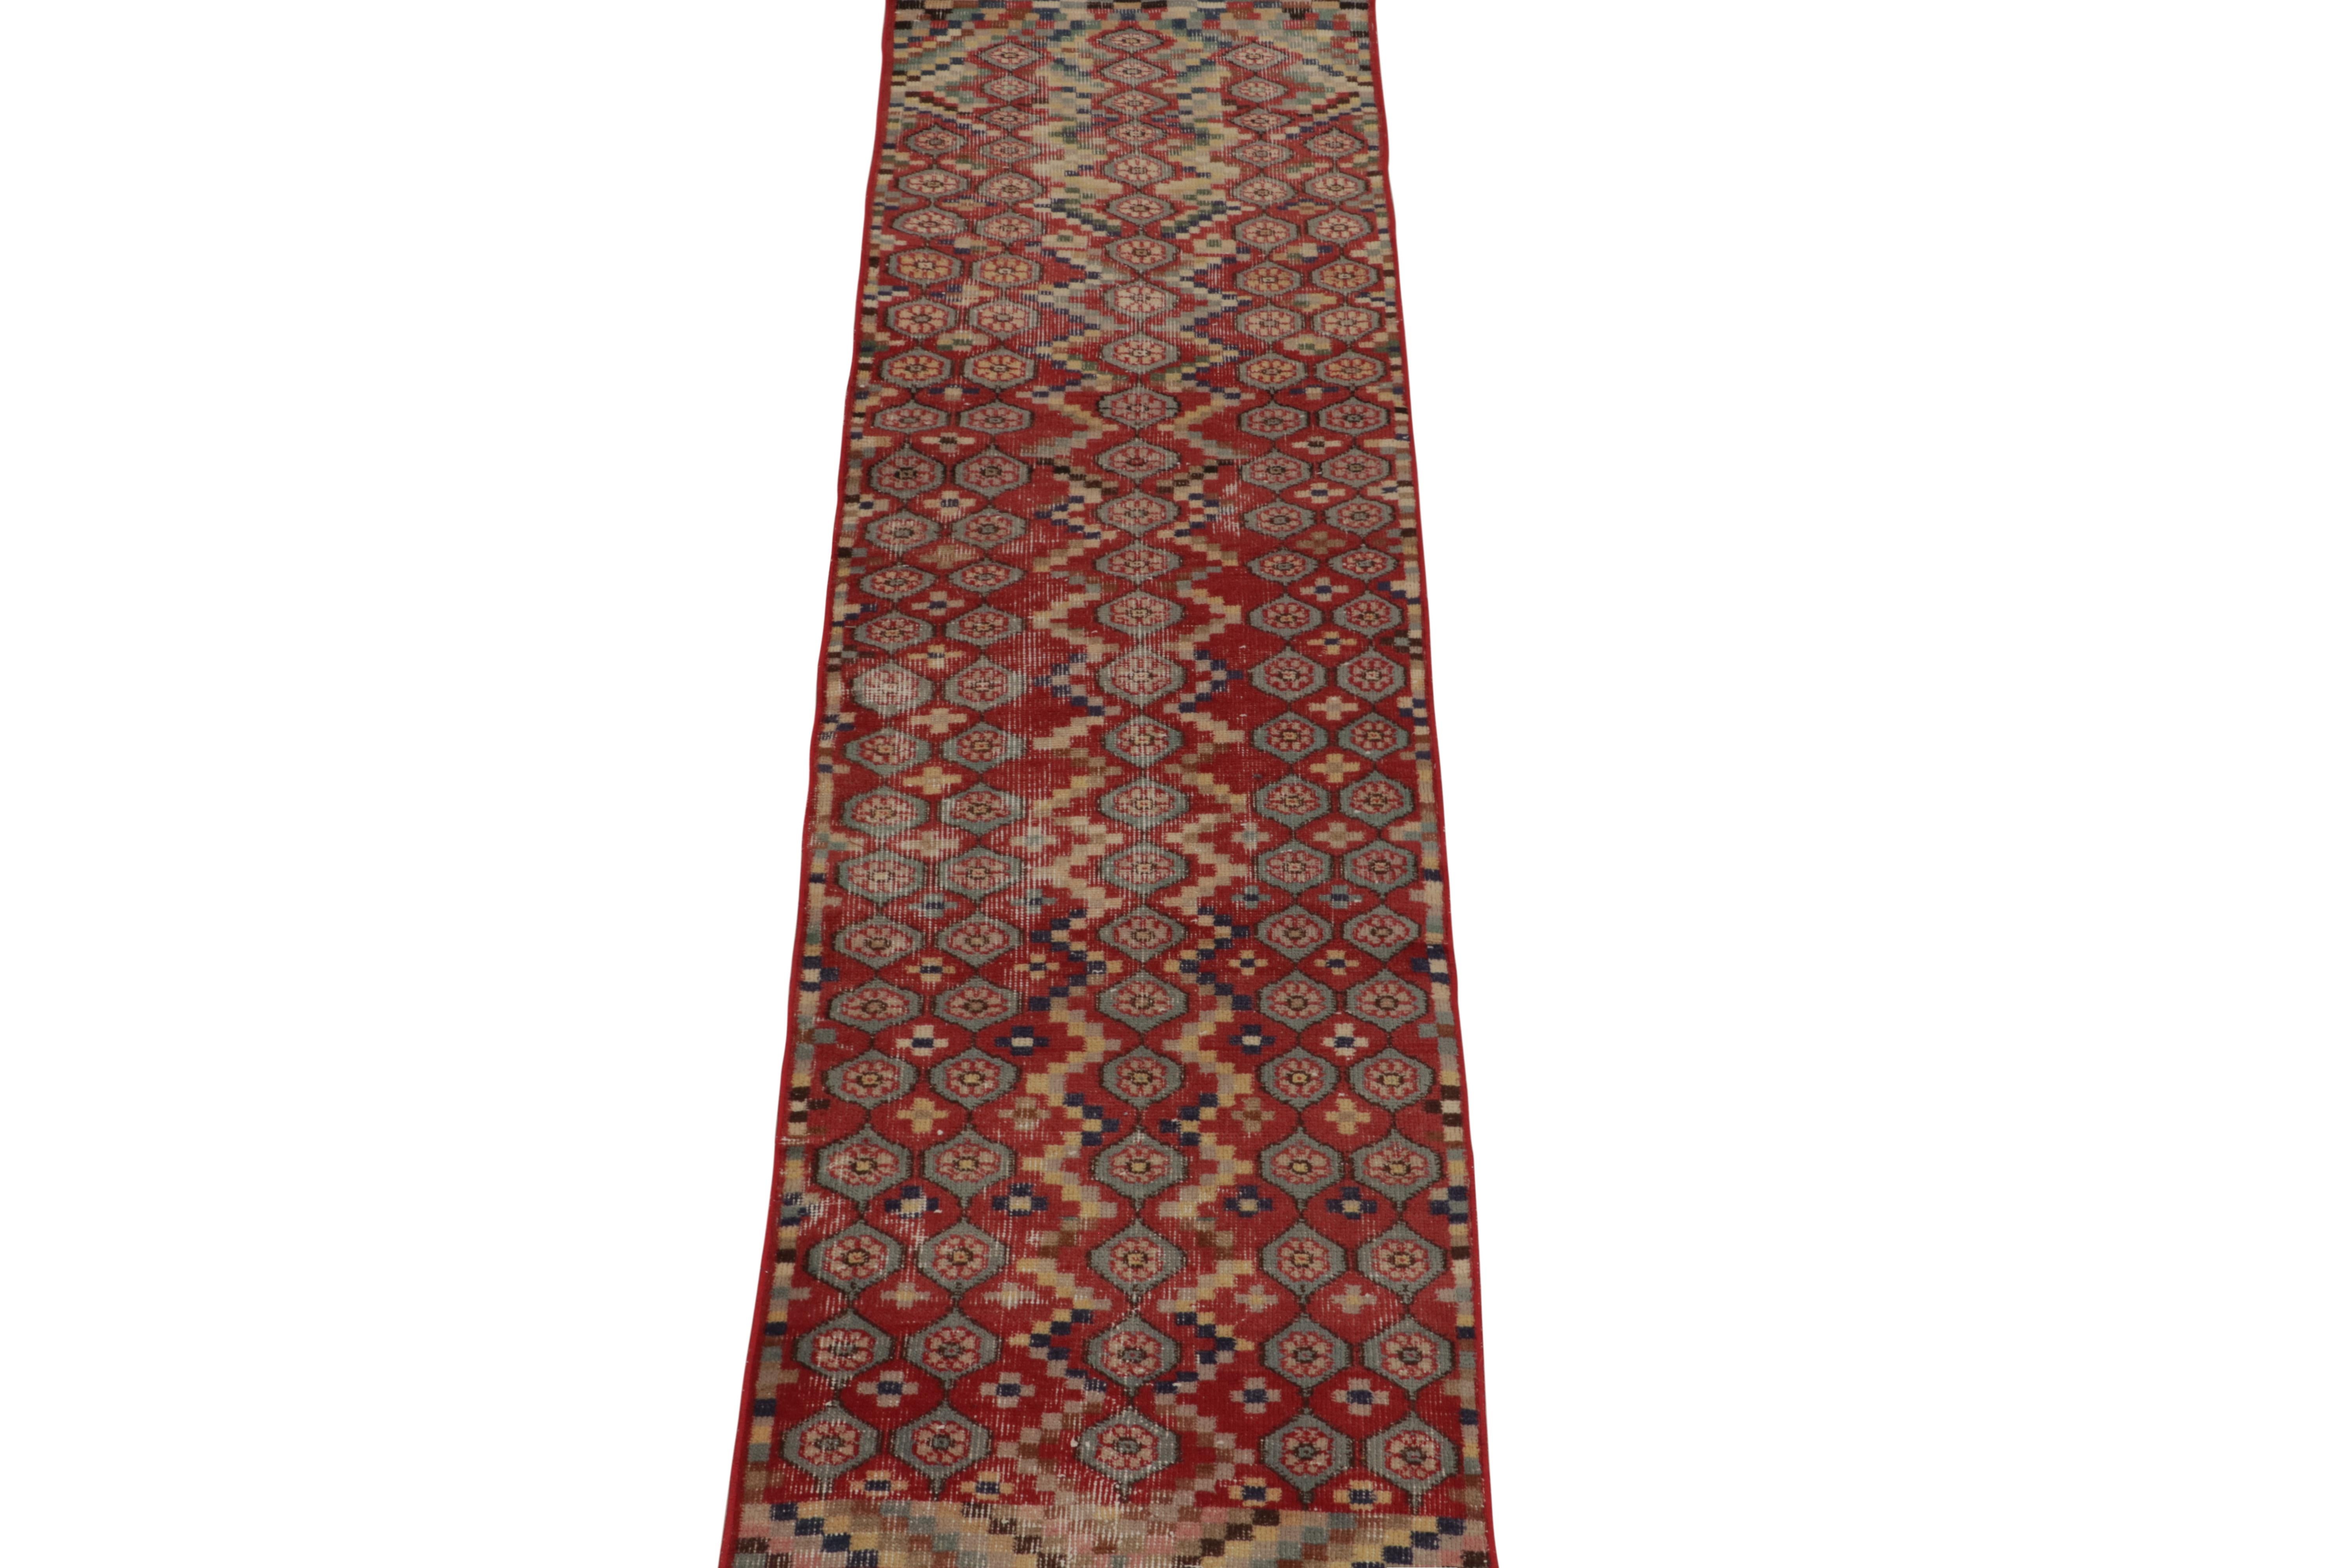 A vintage 2x9 runner from an innovative Turkish atelier, entering Rug & Kilim’s commemorative Mid-Century Pasha Collection.
Further on the design:
Connoisseurs may note we believe this to be among the rare, celebrated works of mid-century icon